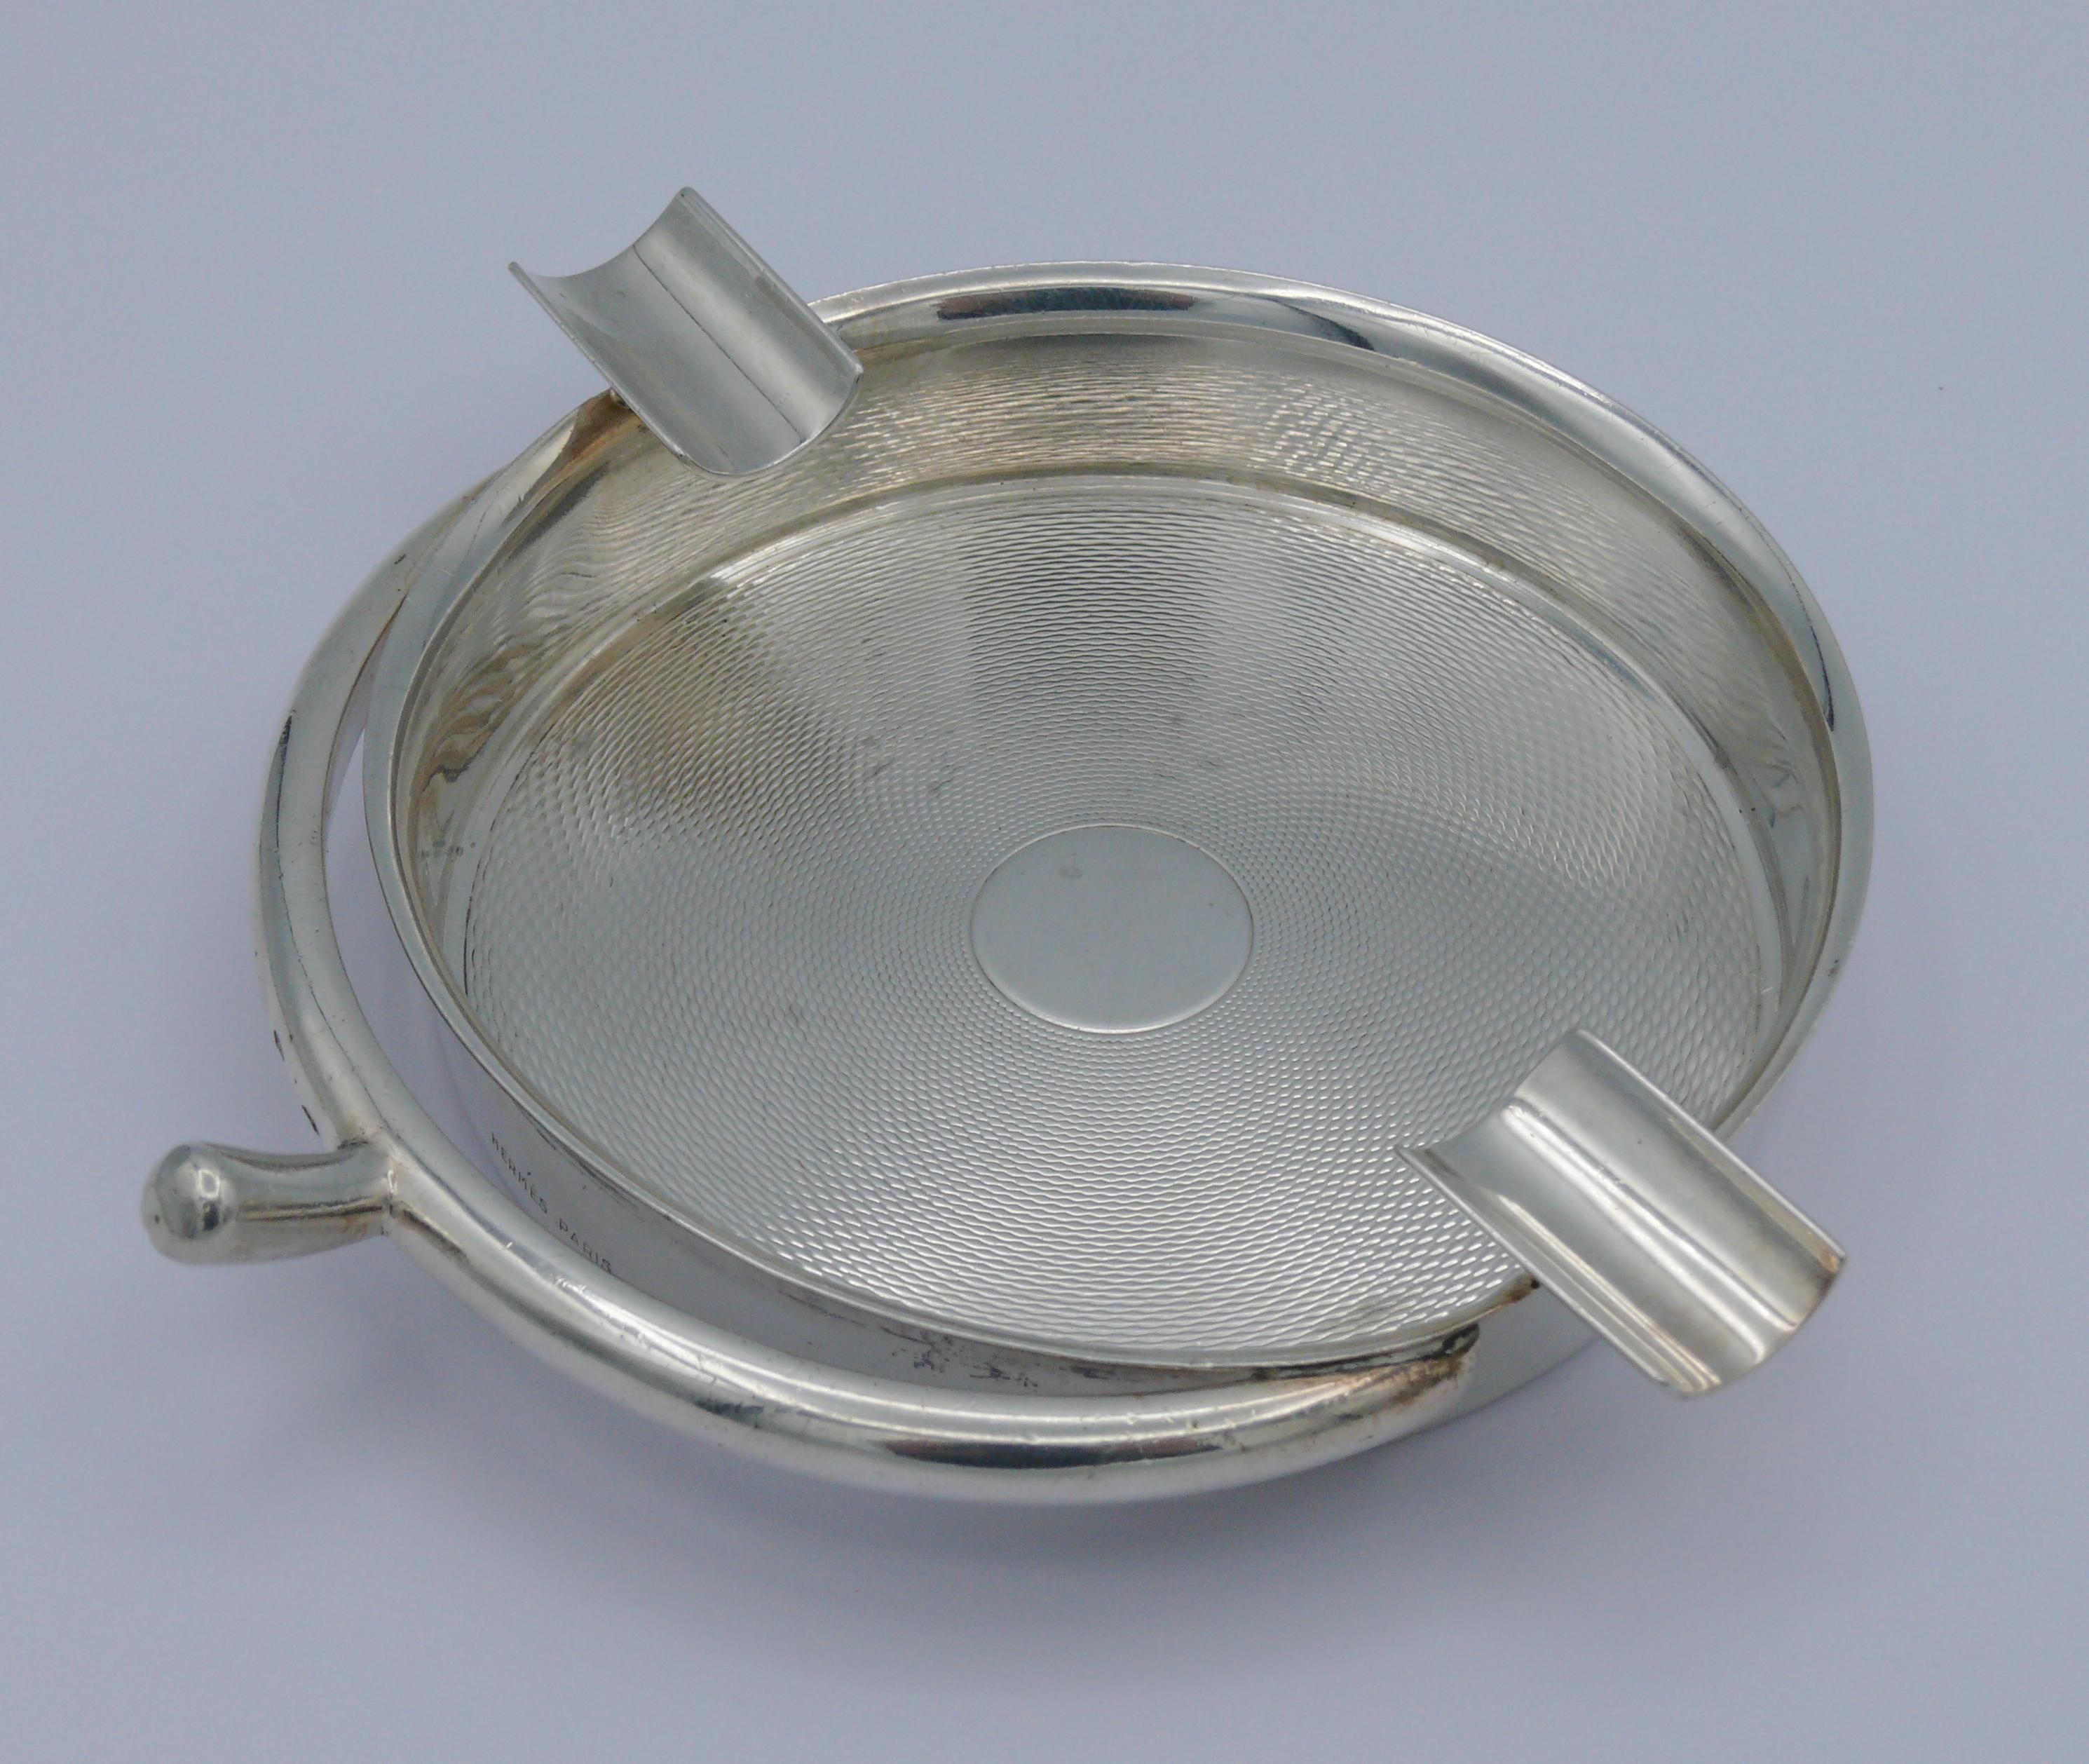 HERMES Vintage Solid Silver Guilloche Stirrup Ashtray For Sale 1